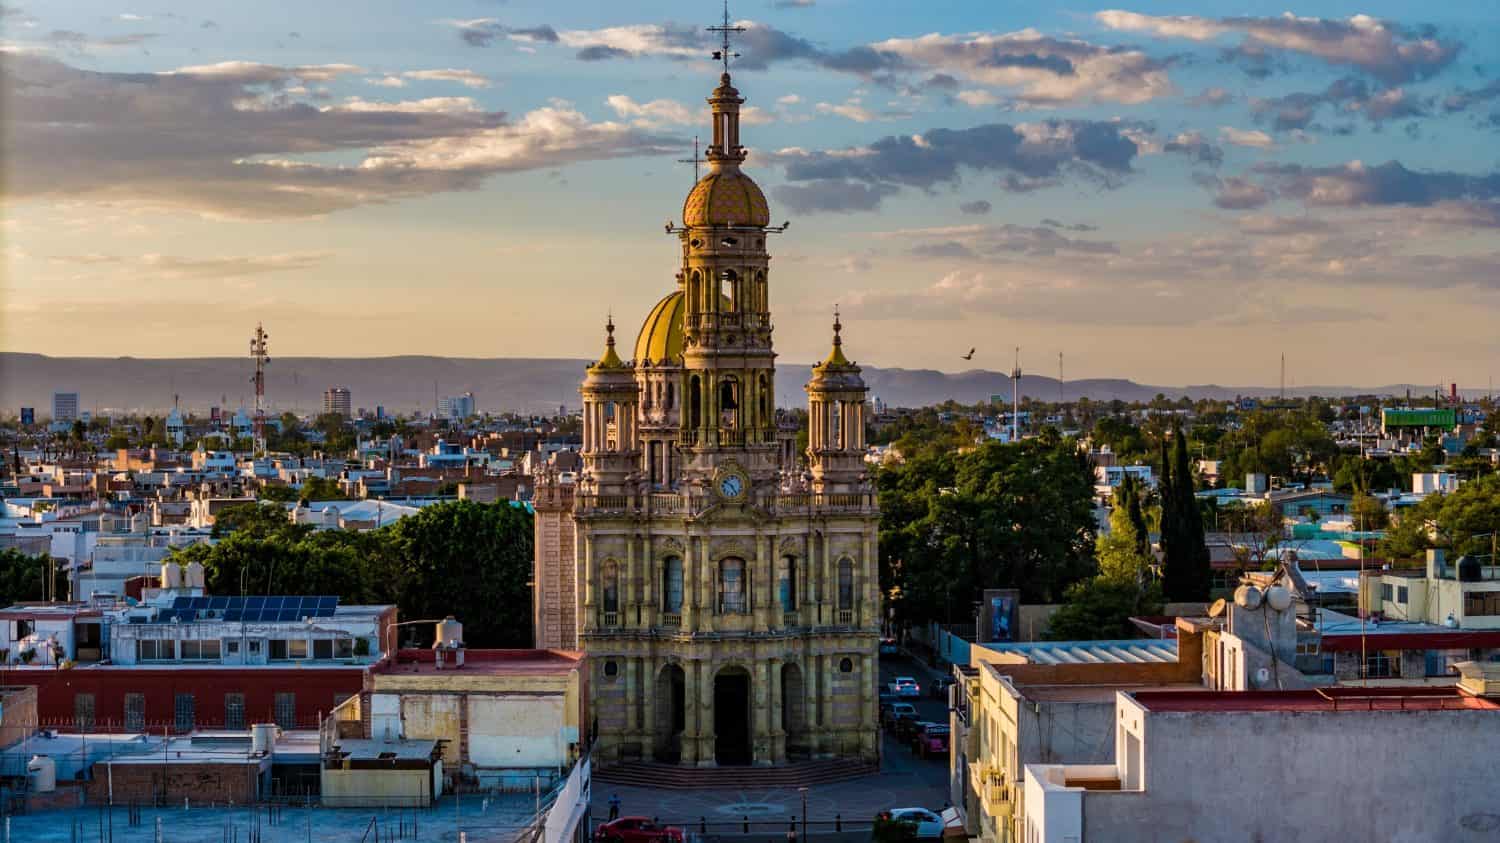 The temple of San Antonio is a monument and religious masterpiece, located in the historic center of the City of Aguascalientes at sunset